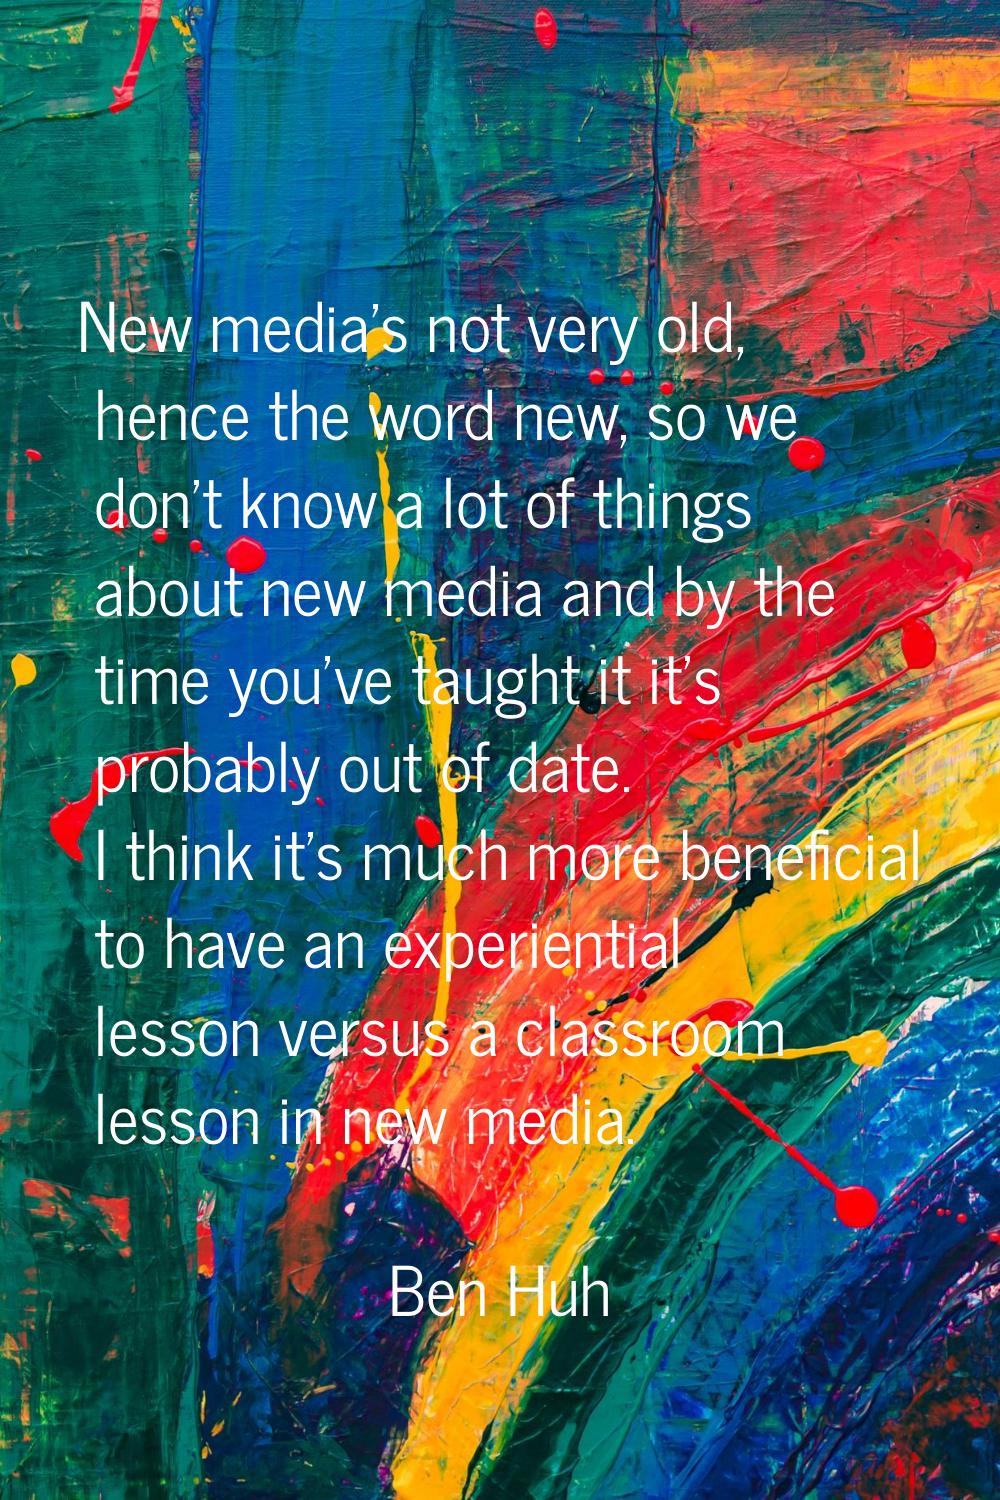 New media's not very old, hence the word new, so we don't know a lot of things about new media and 